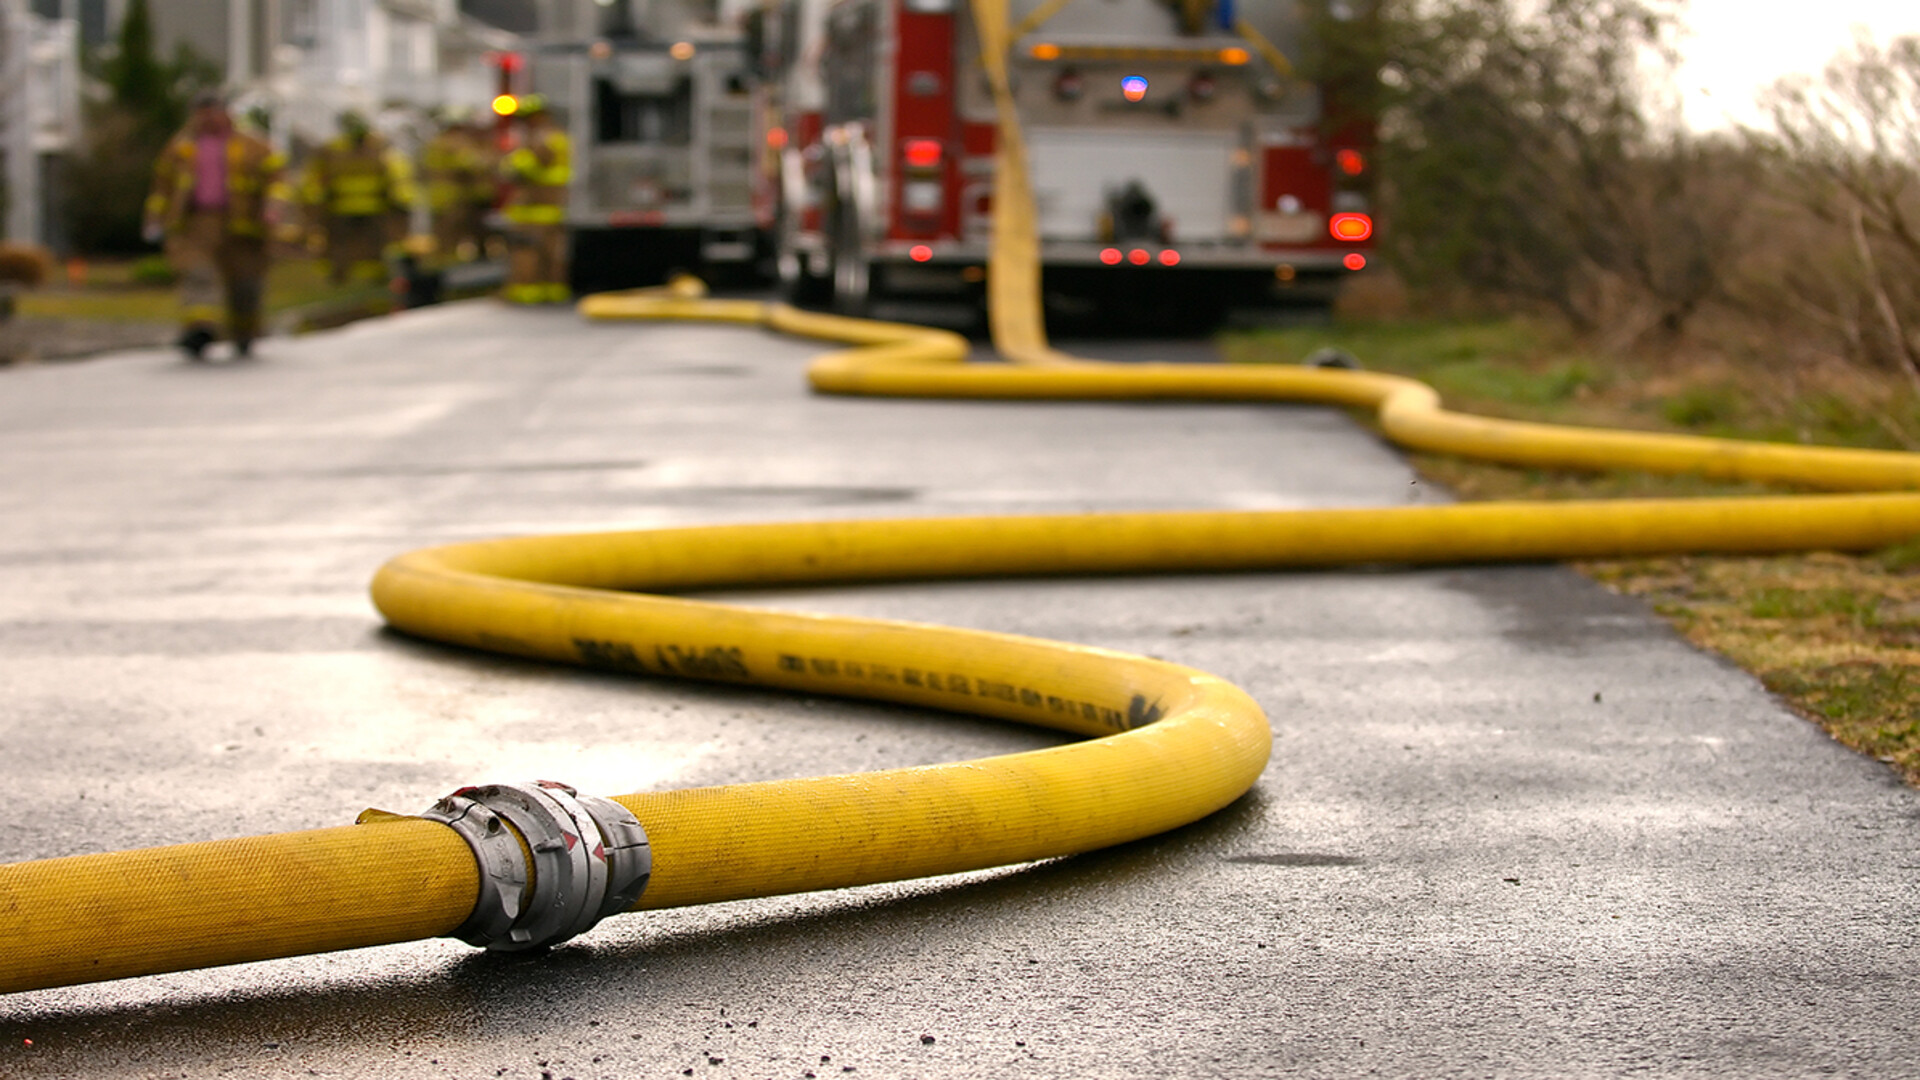 GH water transport hoses for large water demand at a fire scene | © GH